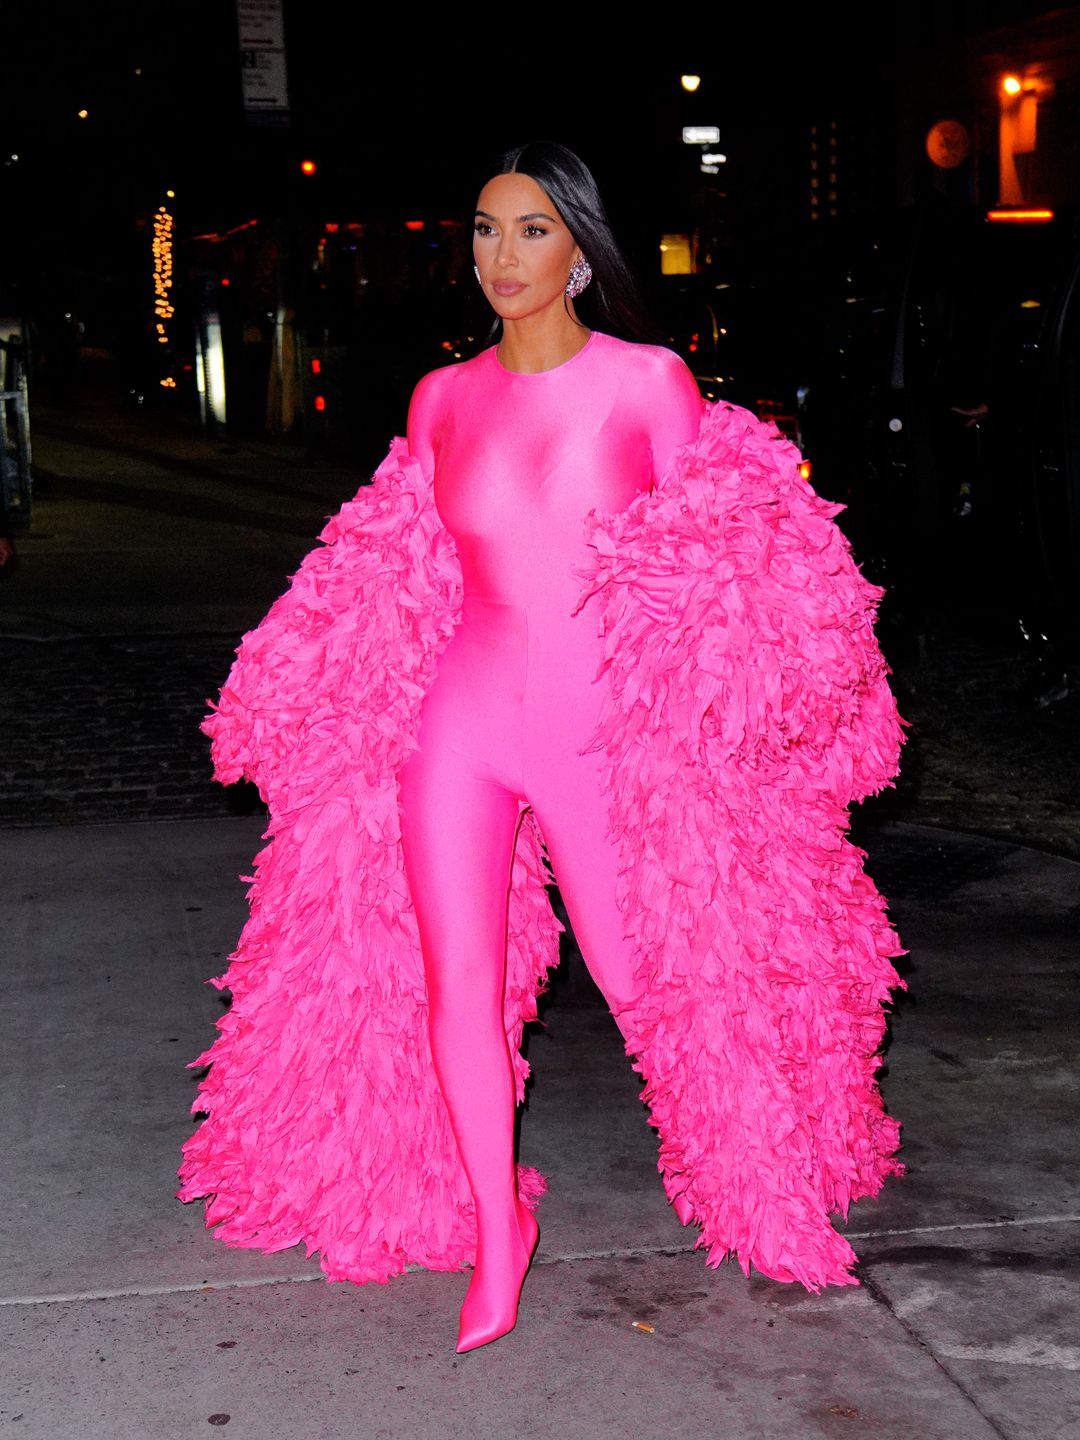 In anticipation of Barbicore's popularity, Kim wore hot pink to the 2021 Saturday Night Live party. 